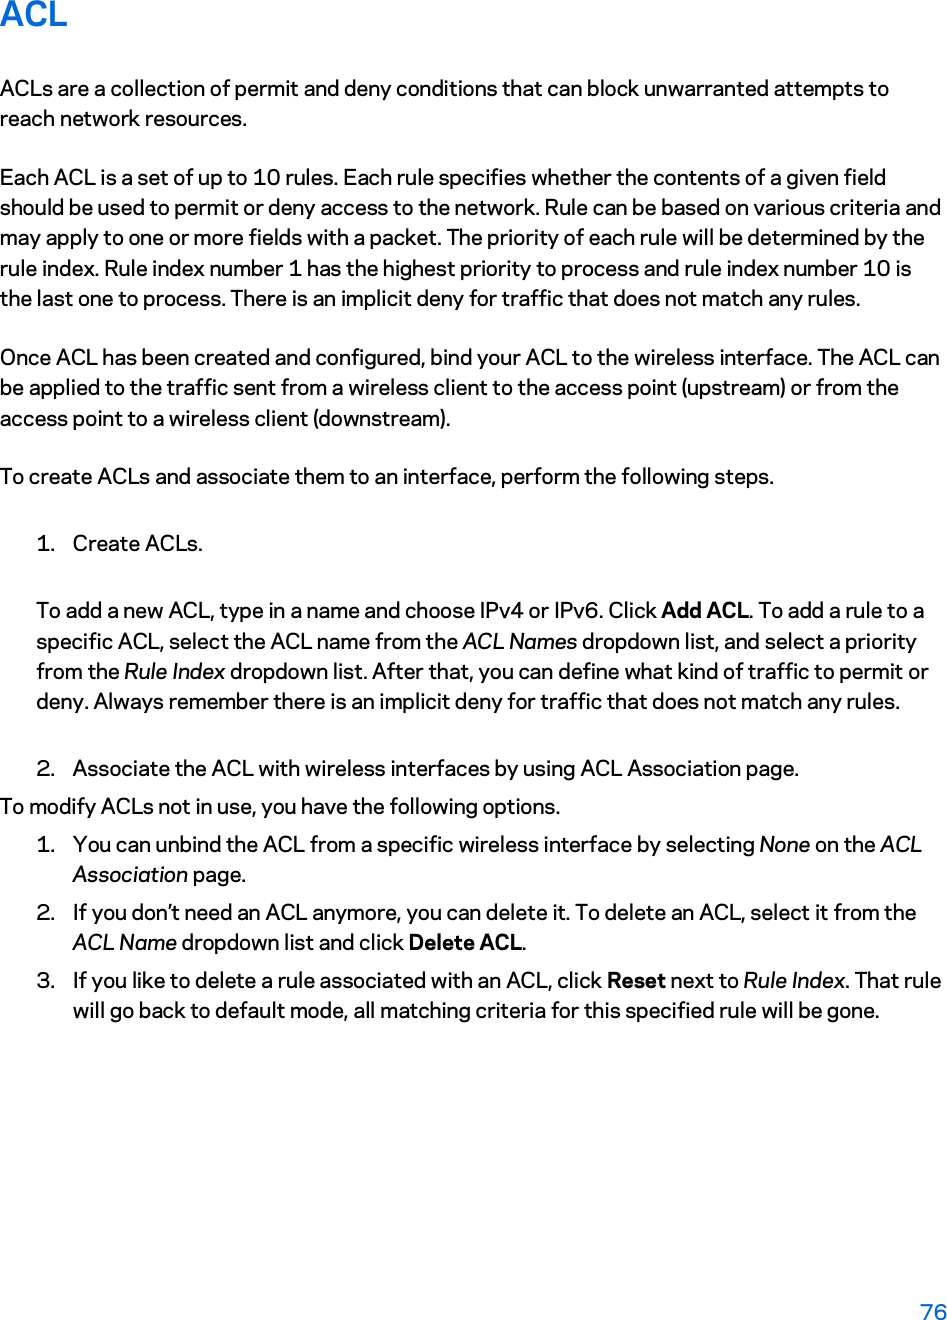 ACL ACLs are a collection of permit and deny conditions that can block unwarranted attempts to reach network resources. Each ACL is a set of up to 10 rules. Each rule specifies whether the contents of a given field should be used to permit or deny access to the network. Rule can be based on various criteria and may apply to one or more fields with a packet. The priority of each rule will be determined by the rule index. Rule index number 1 has the highest priority to process and rule index number 10 is the last one to process. There is an implicit deny for traffic that does not match any rules. Once ACL has been created and configured, bind your ACL to the wireless interface. The ACL can be applied to the traffic sent from a wireless client to the access point (upstream) or from the access point to a wireless client (downstream).  To create ACLs and associate them to an interface, perform the following steps.  1. Create ACLs. To add a new ACL, type in a name and choose IPv4 or IPv6. Click Add ACL. To add a rule to a specific ACL, select the ACL name from the ACL Names dropdown list, and select a priority from the Rule Index dropdown list. After that, you can define what kind of traffic to permit or deny. Always remember there is an implicit deny for traffic that does not match any rules. 2. Associate the ACL with wireless interfaces by using ACL Association page.  To modify ACLs not in use, you have the following options.  1. You can unbind the ACL from a specific wireless interface by selecting None on the ACL Association page.  2. If you don’t need an ACL anymore, you can delete it. To delete an ACL, select it from the ACL Name dropdown list and click Delete ACL.  3. If you like to delete a rule associated with an ACL, click Reset next to Rule Index. That rule will go back to default mode, all matching criteria for this specified rule will be gone.  76 